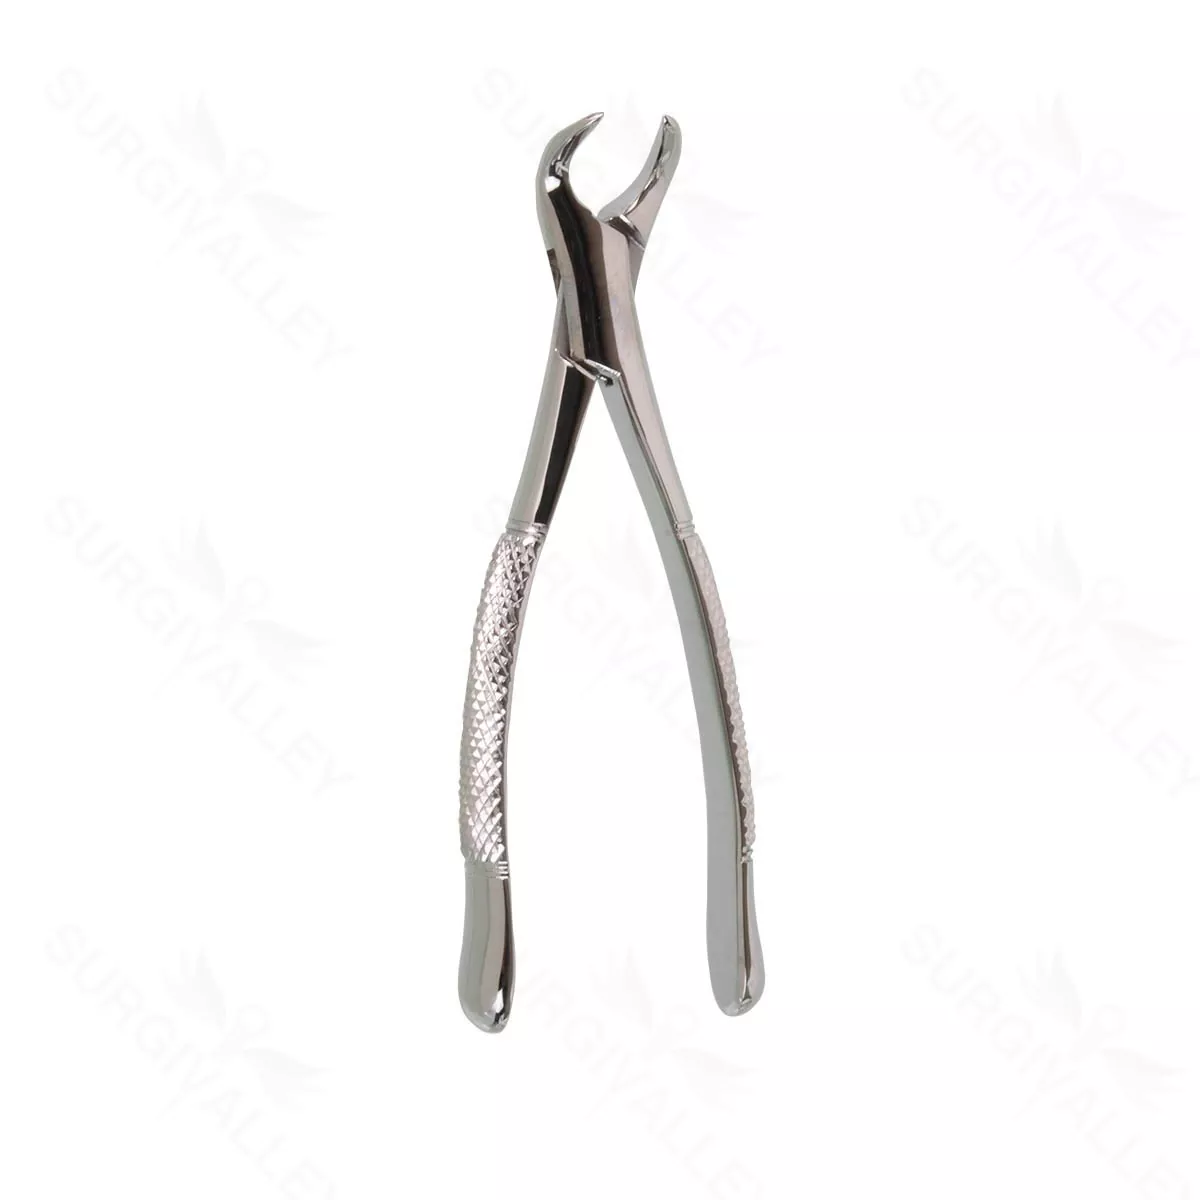 Oral Surgery Exodontia Extractor Forceps – 151 lower